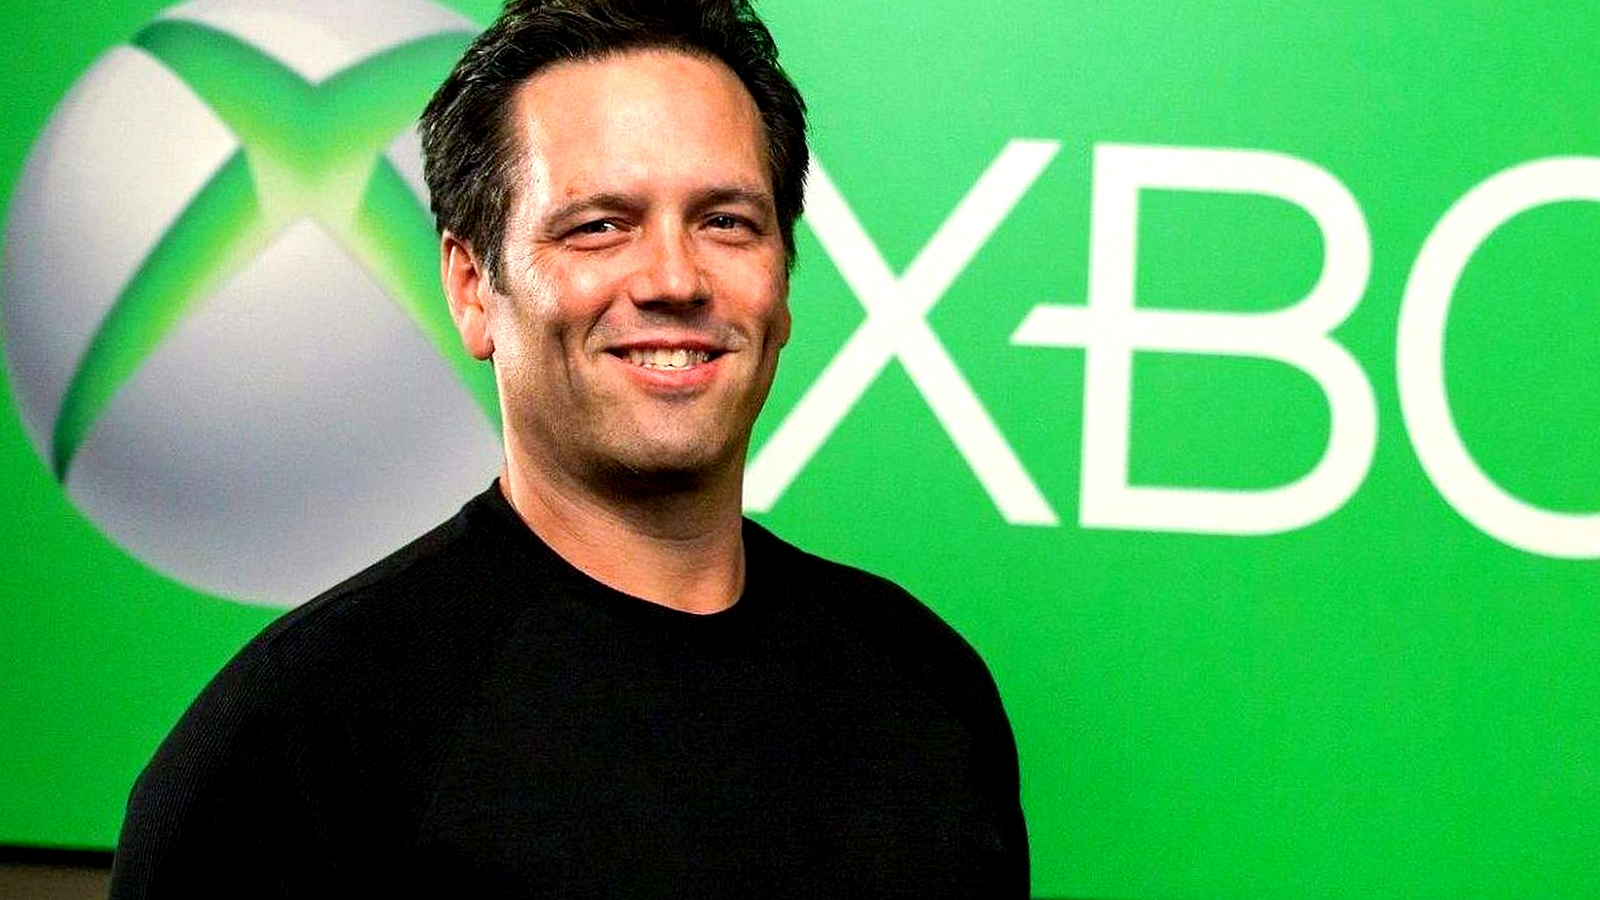 Xbox's Phil Spencer Seems Happy To Show Off About Playing